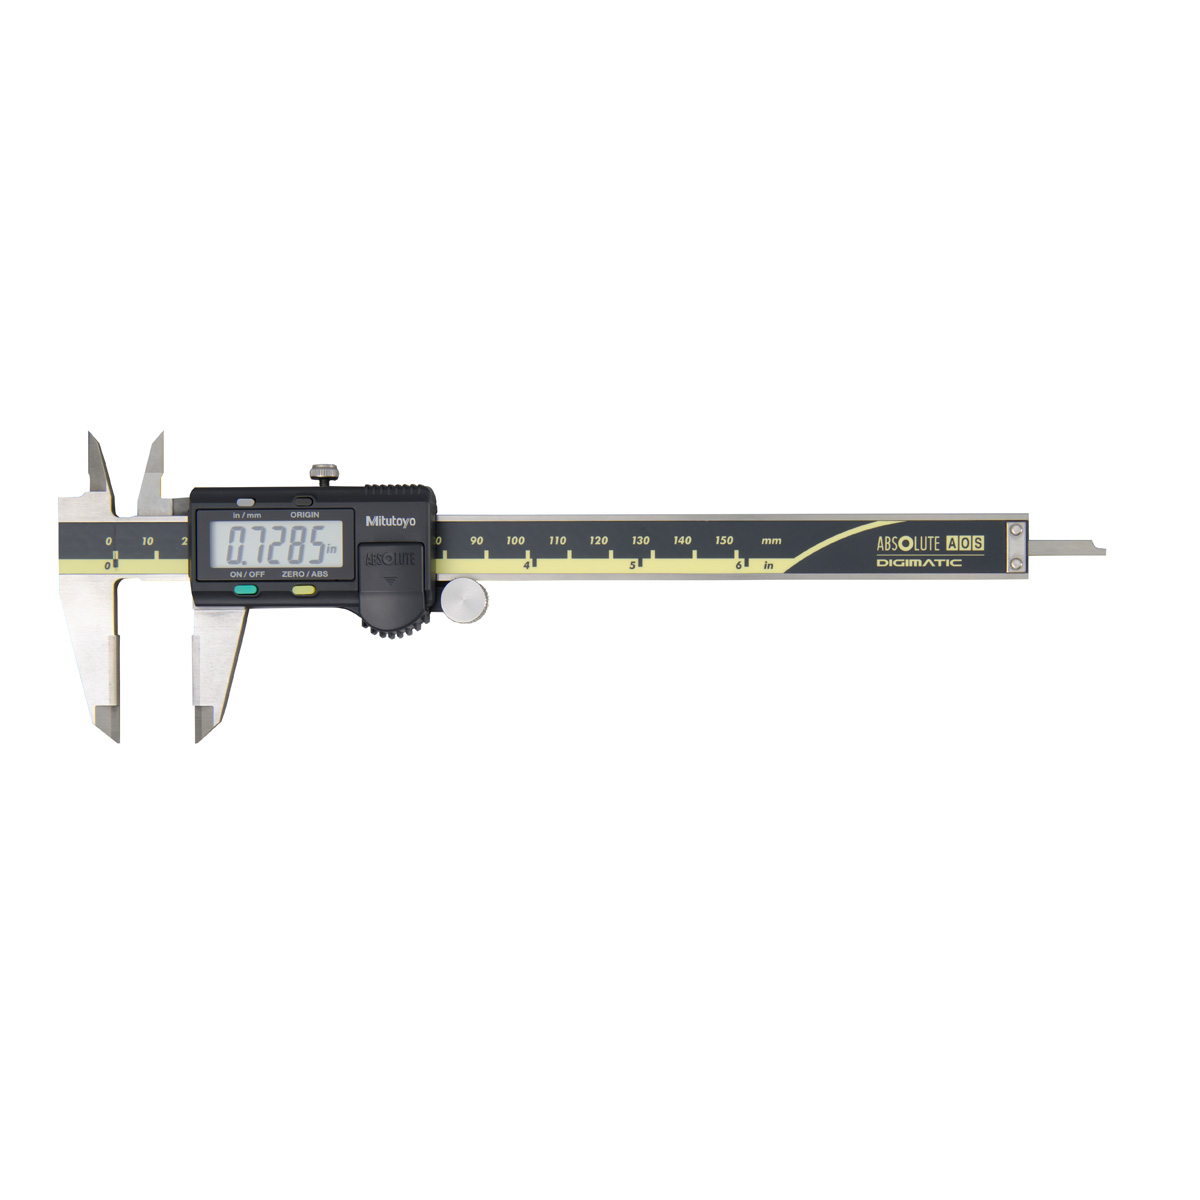 Picture of Mitutoyo 500-160-30 0-6 in. Digimatic AOS Absolute Caliper with Range Indoor & Outdoor Jaws